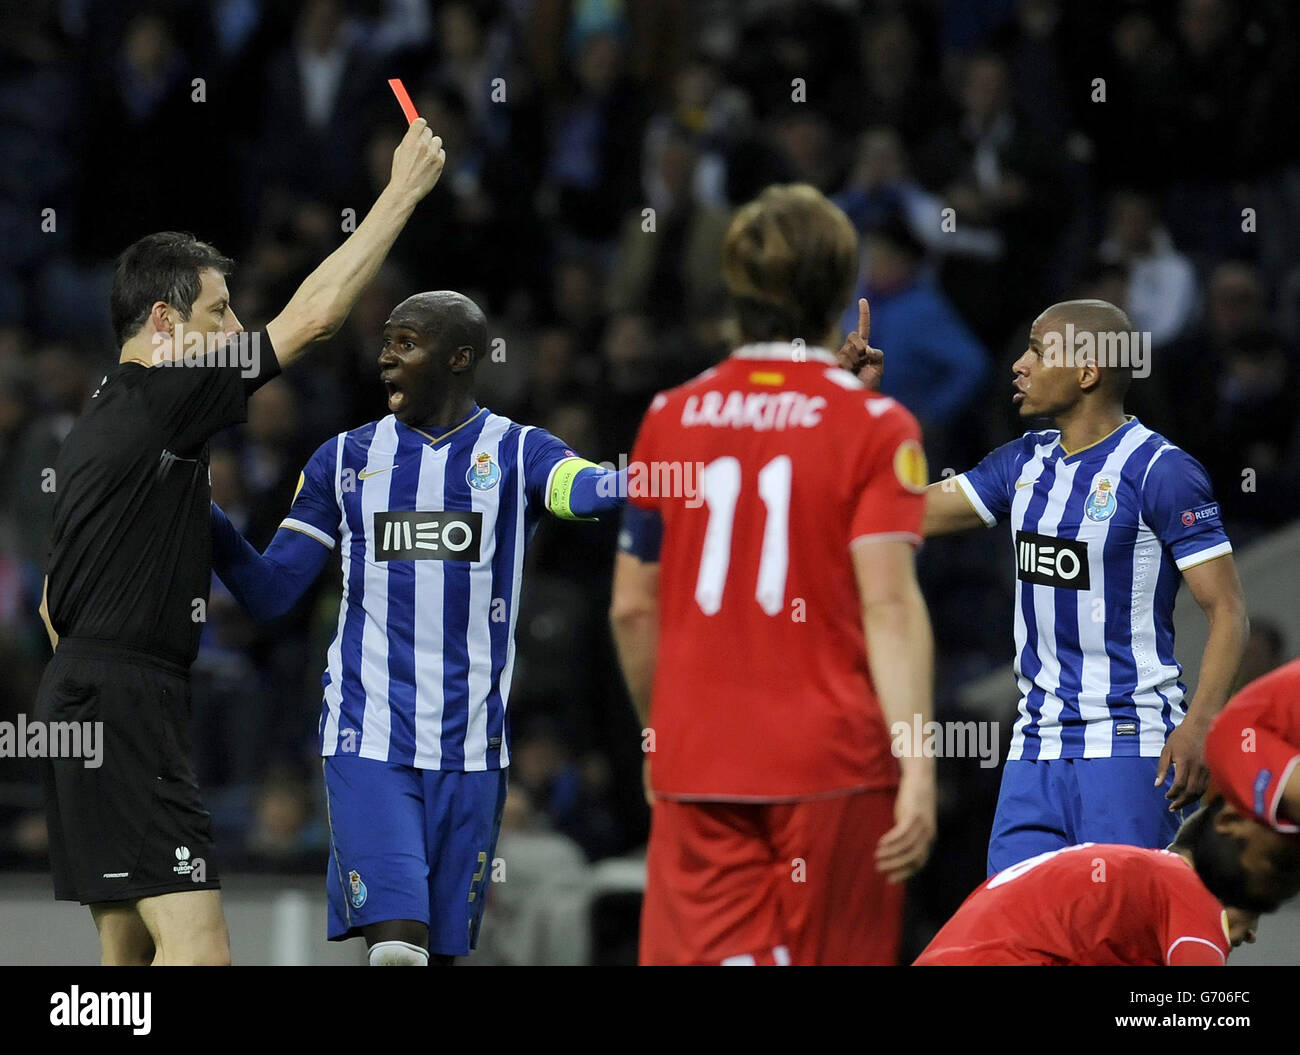 FC Porto's Fernando Reges, right, from Brazil is shown a red card by referee referee Wolfgang Stark, from Germany, with Eliaquim Mangala, at second left, from France during their Europa League Quarter-final, first leg soccer match at the Dragao stadium, in Porto, Portugal, Thursday April 3, 2014. Mangala scored the only goal in Porto's 1-0 victory.(AP Photo/Paulo Duarte) ... Portugal Soccer Europa League ... 03-04-2014 ... Porto ... Portugal ... Photo credit should read: Paulo Duarte/AP. Unique Reference No. 19471204 ... Stock Photo